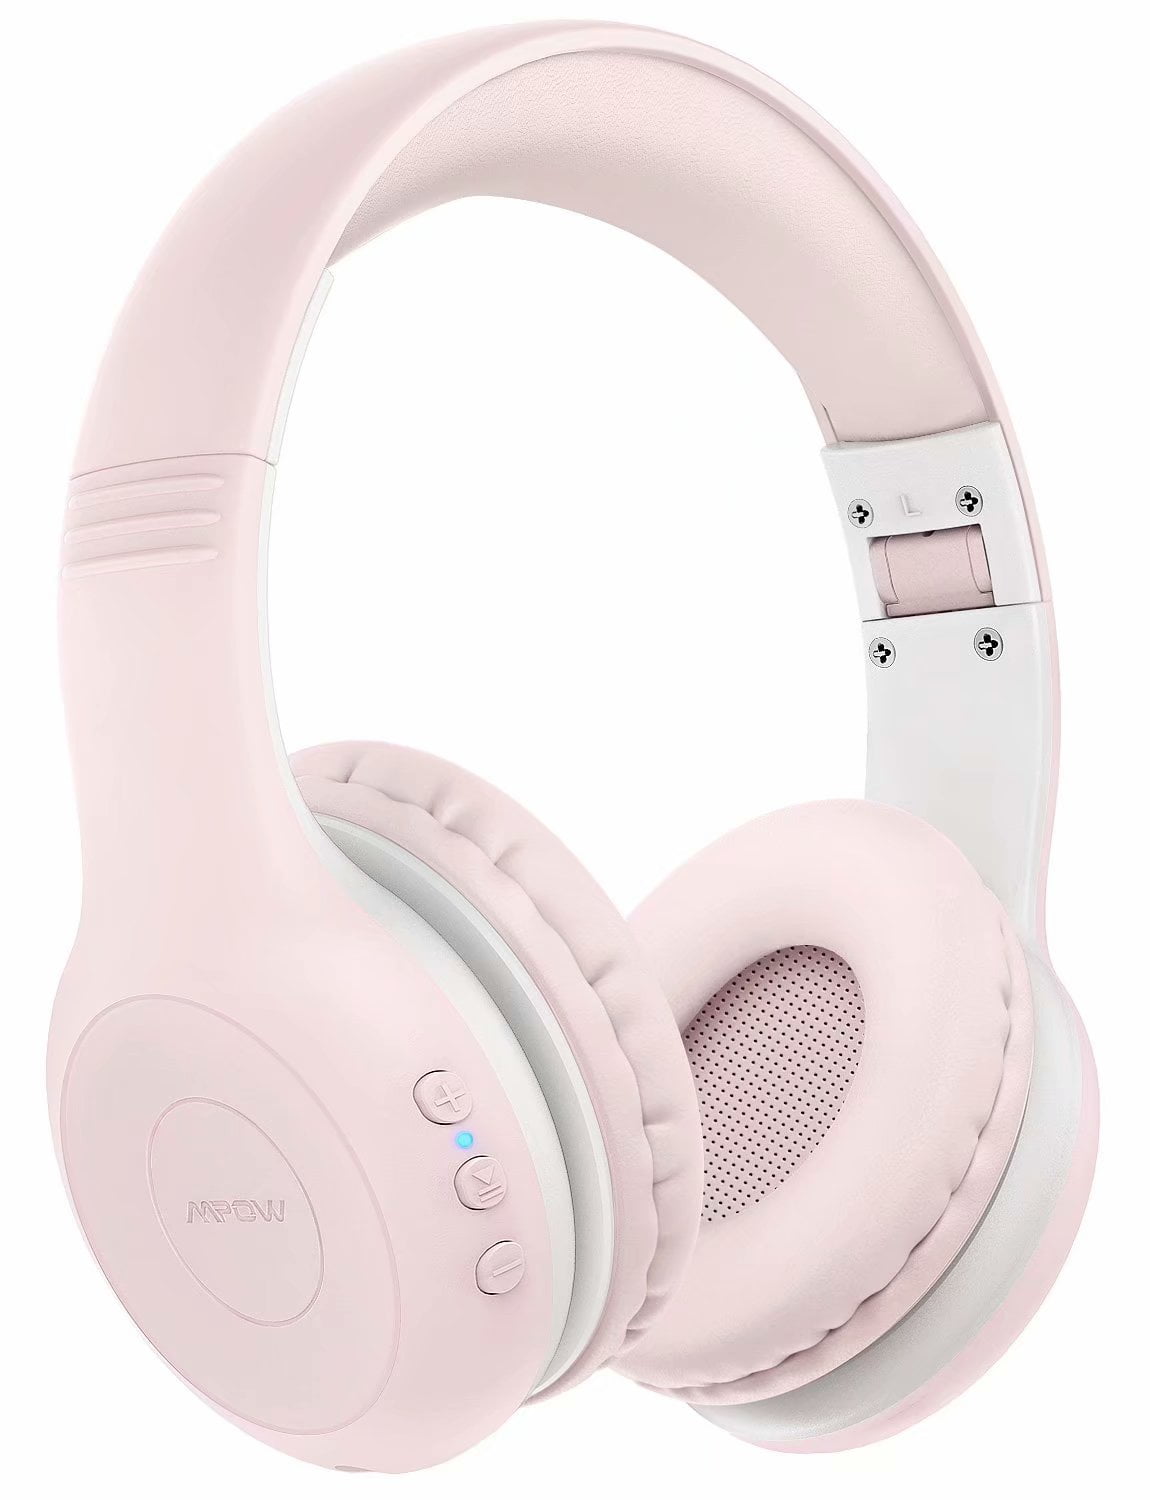 Mpow CH6 Plus Kids Headphones, 5.0 Headphones for HD Stereo Headphones, 16-Hour Playtime Wireless Headphones, Foldable Over-ear Headset with Mic for PC/Cellphone/iPad /Study Pink - Walmart.com